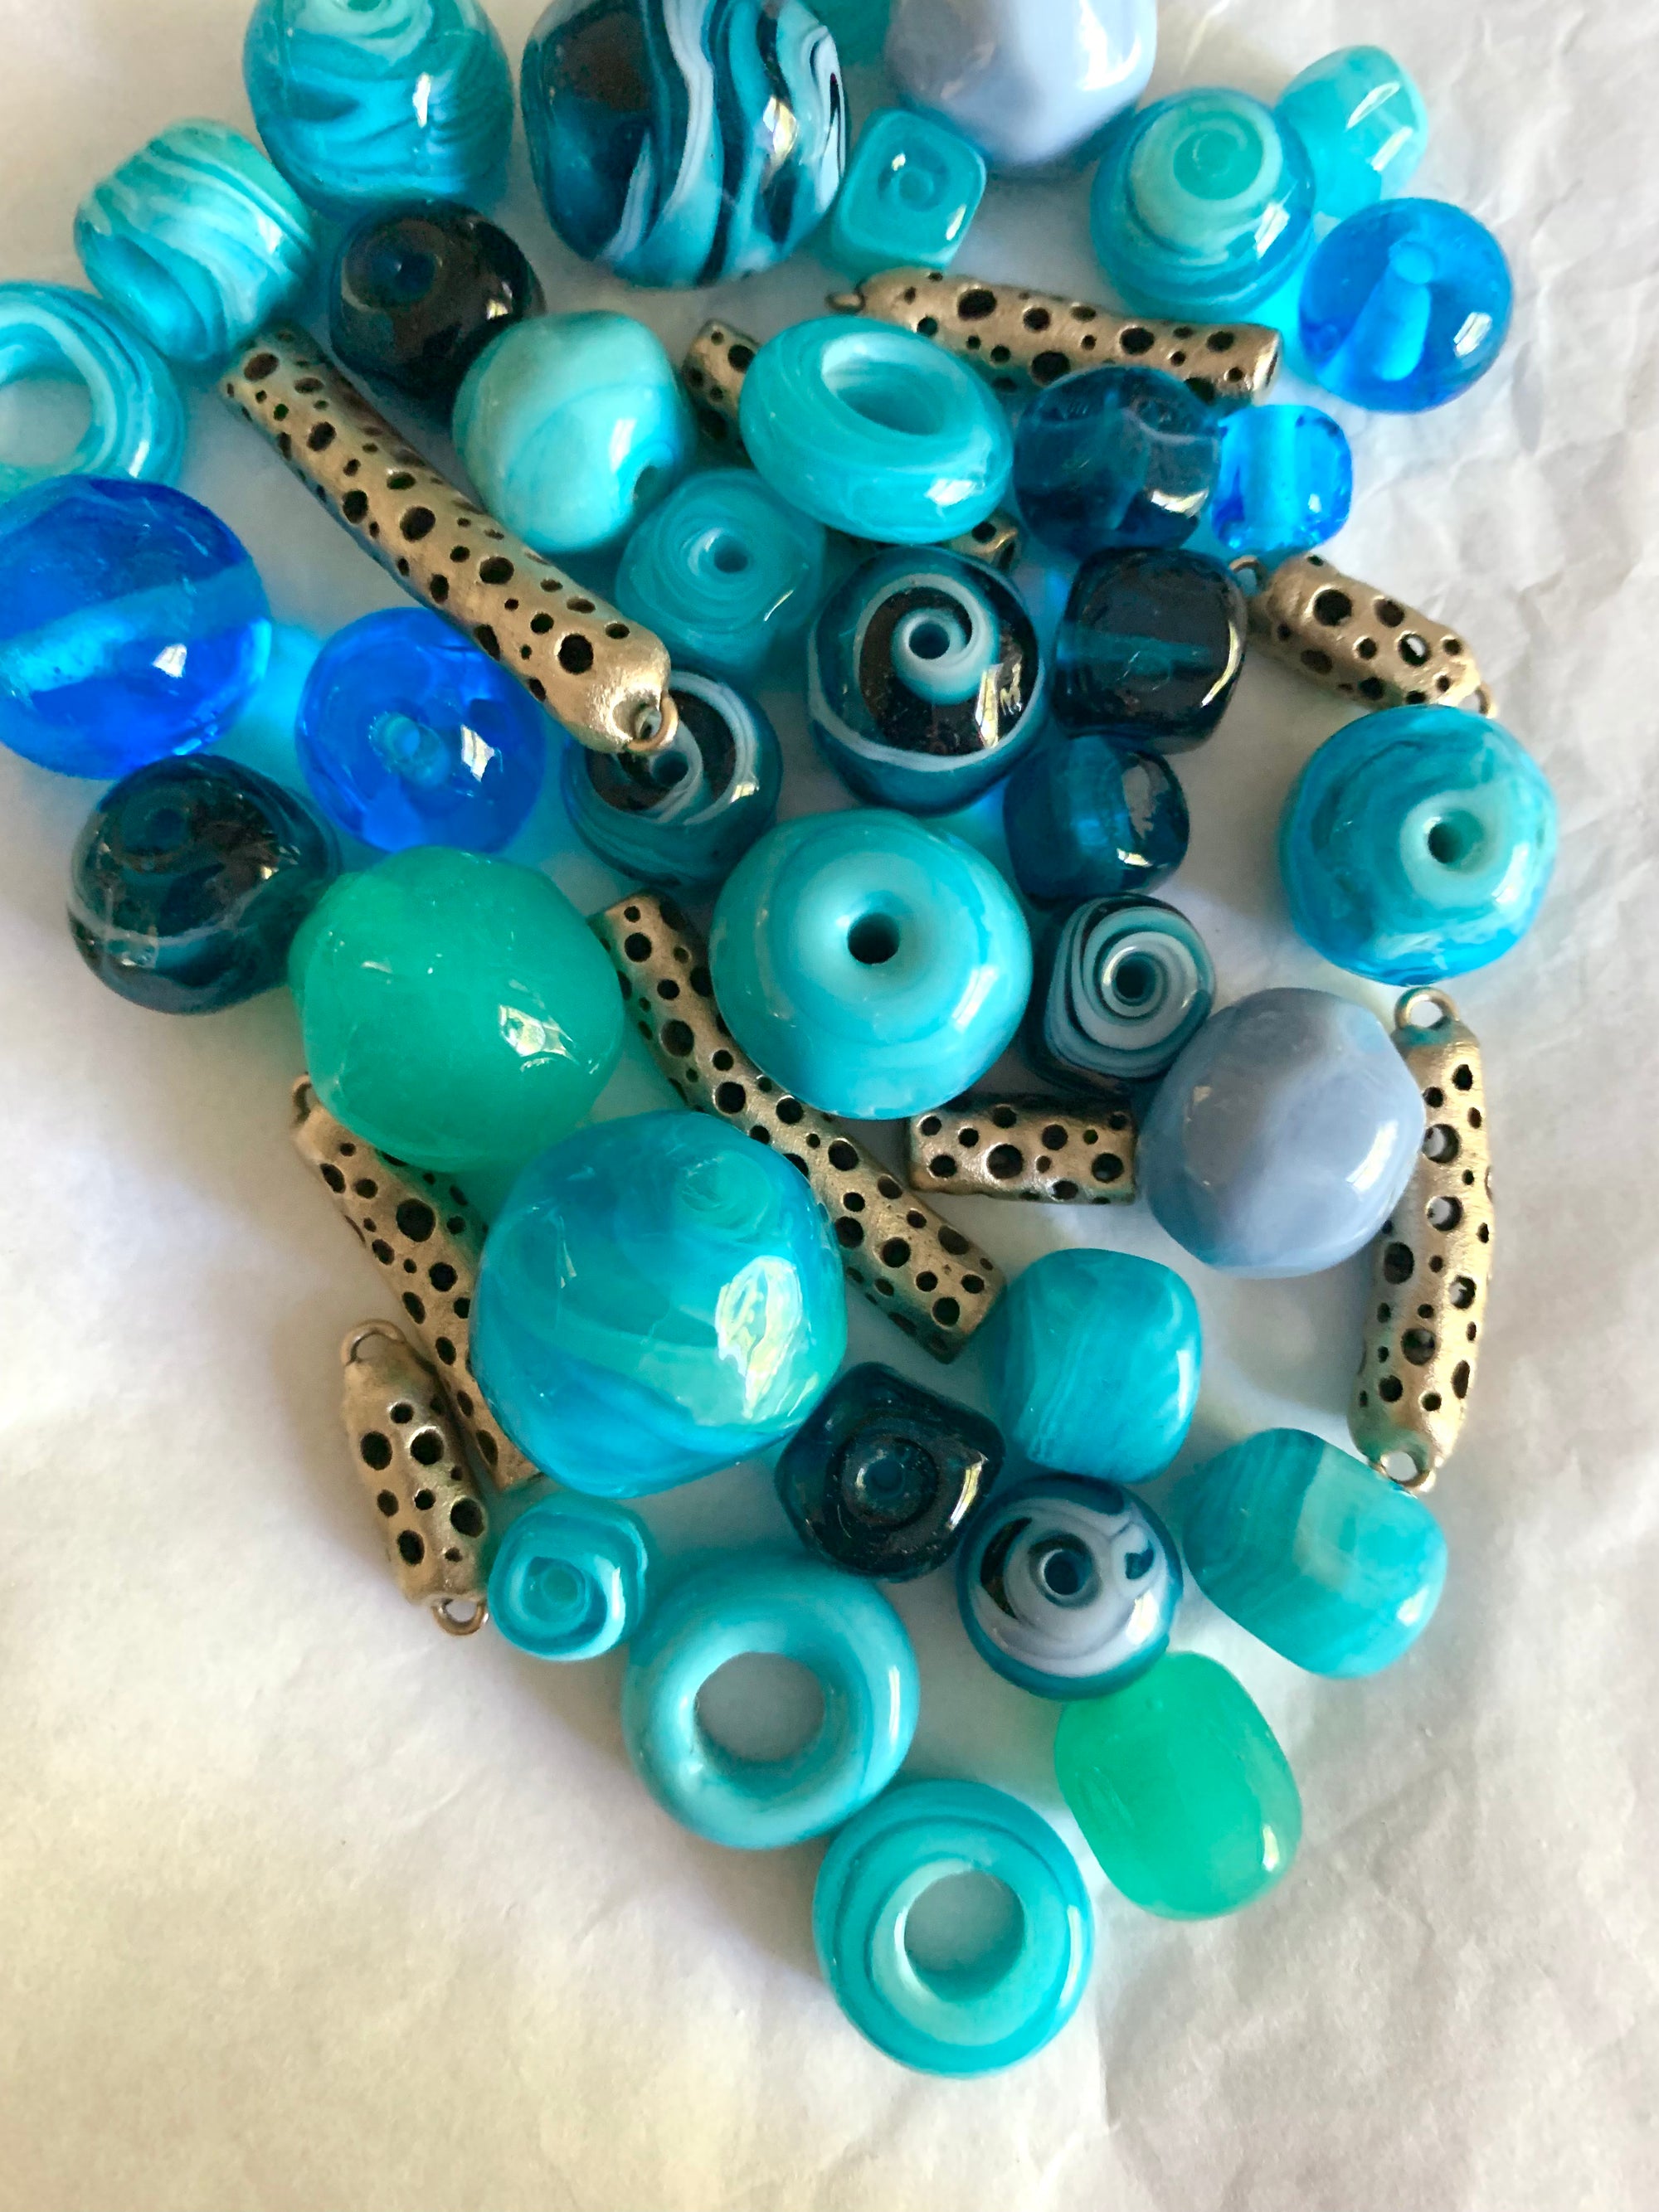 Tumbling bronze and ocean blue glass beads